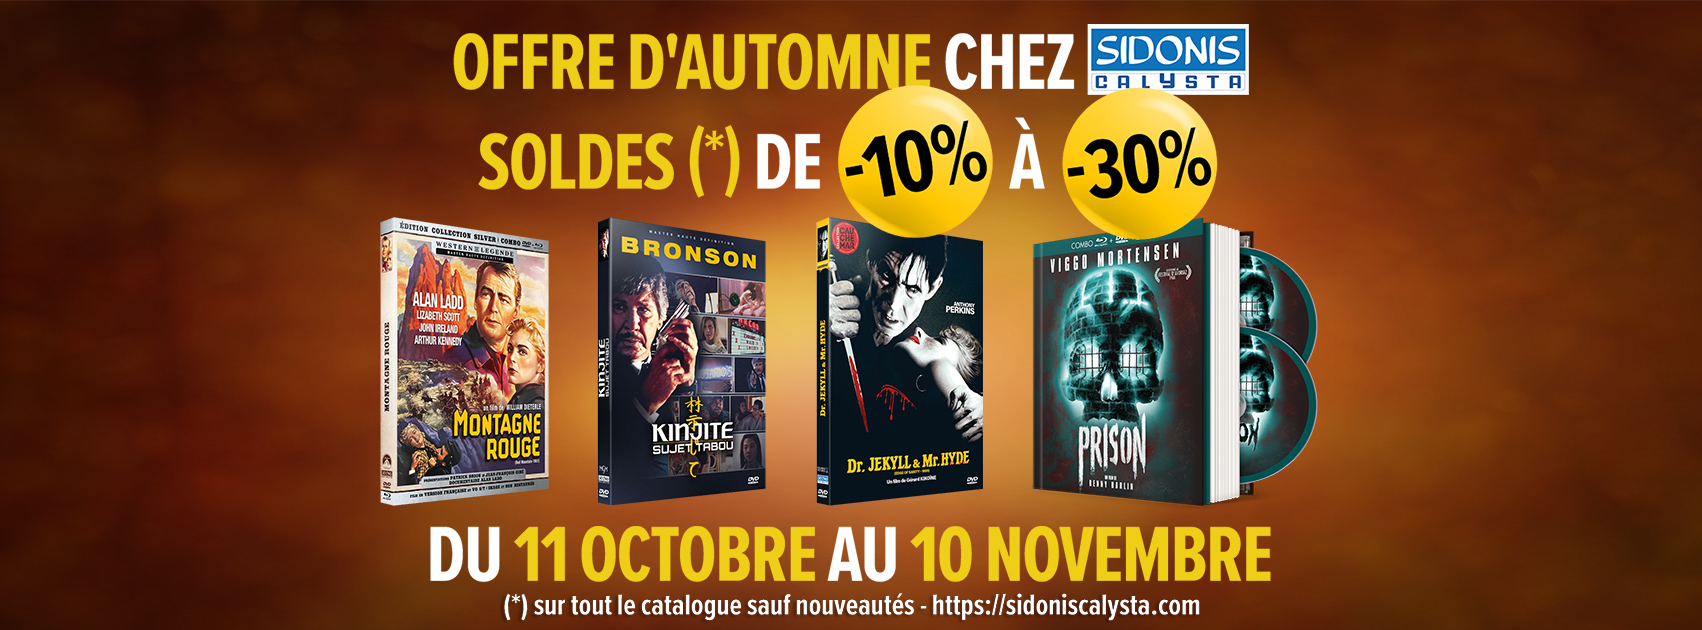 Bons plans DVD ou Blu-ray - Page 45 HOME%20FB-PRECO%20OP%20SOLDES%20DAUTOMNE